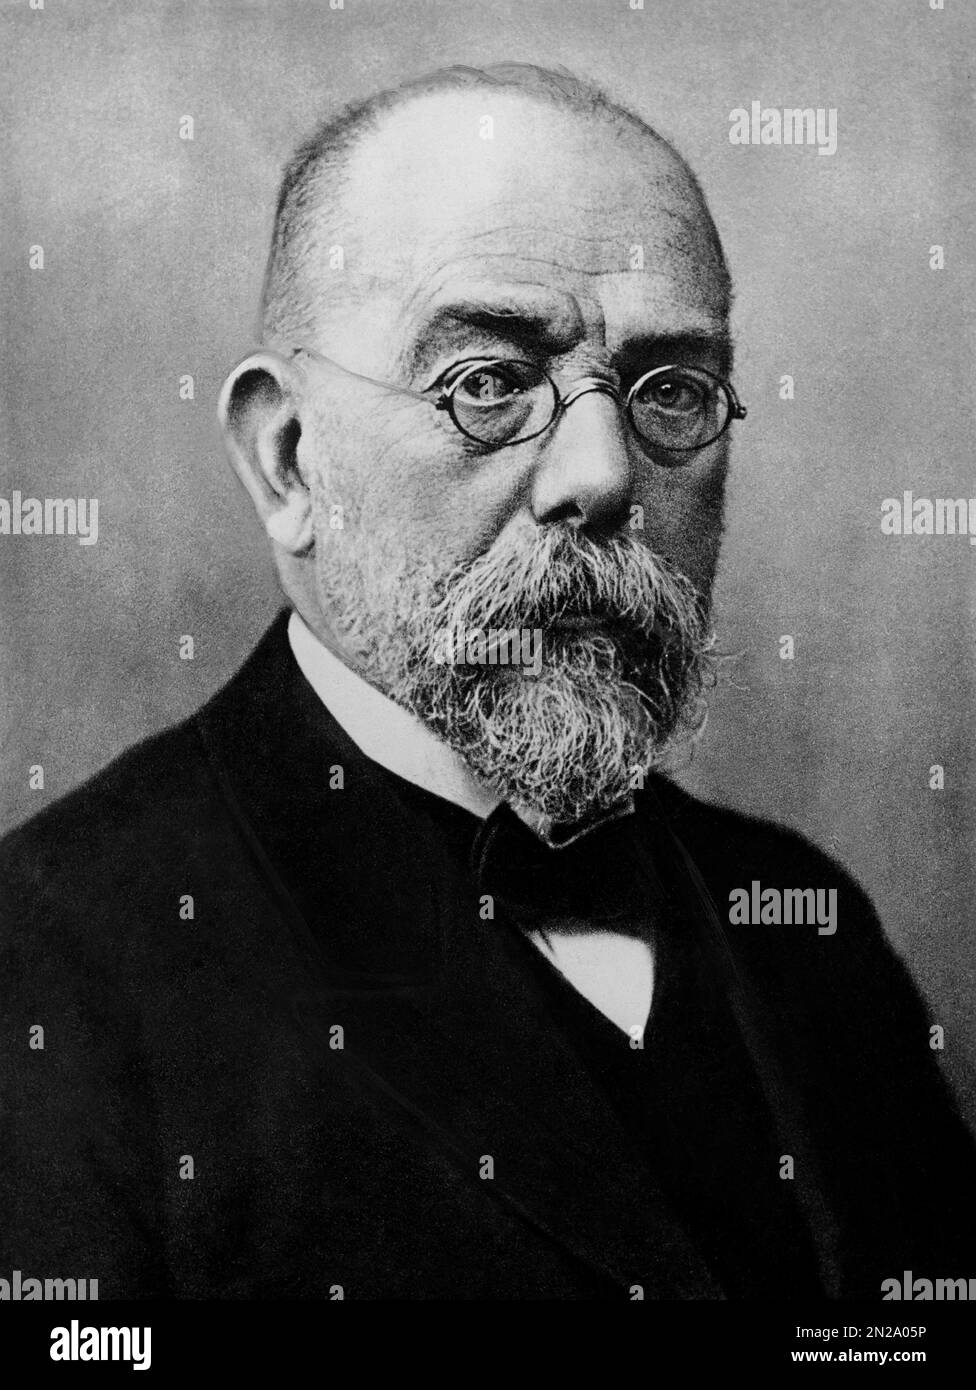 1908 ca, GERMANY : The german  Doctor ROBERT KOCH ( 1843 - 1910 ). He became famous for the discovery of the anthrax bacillus ( 1877 ), the tuberculosis bacillus ( 1882 ) and the cholera vibrio ( 1883 ) and for his development of Koch's postulates. He was awarded the NOBEL Prize in Physiology or Medicine for his tuberculosis findings in 1905 . He is considered one of the founders of bacteriology Unknown photographer .  - BATTERIOLOGO - TBC - BATTERIOLOGIA - TUBERCOLOSI - ANTRACE - PREMIO NOBEL per la MEDICINA - VIROLOGIA - VIRUS - VIROLOGO - MEDICIN - SCIENZA - SCIENZIATO - BIOLOGIA - BIOLOGY Stock Photo